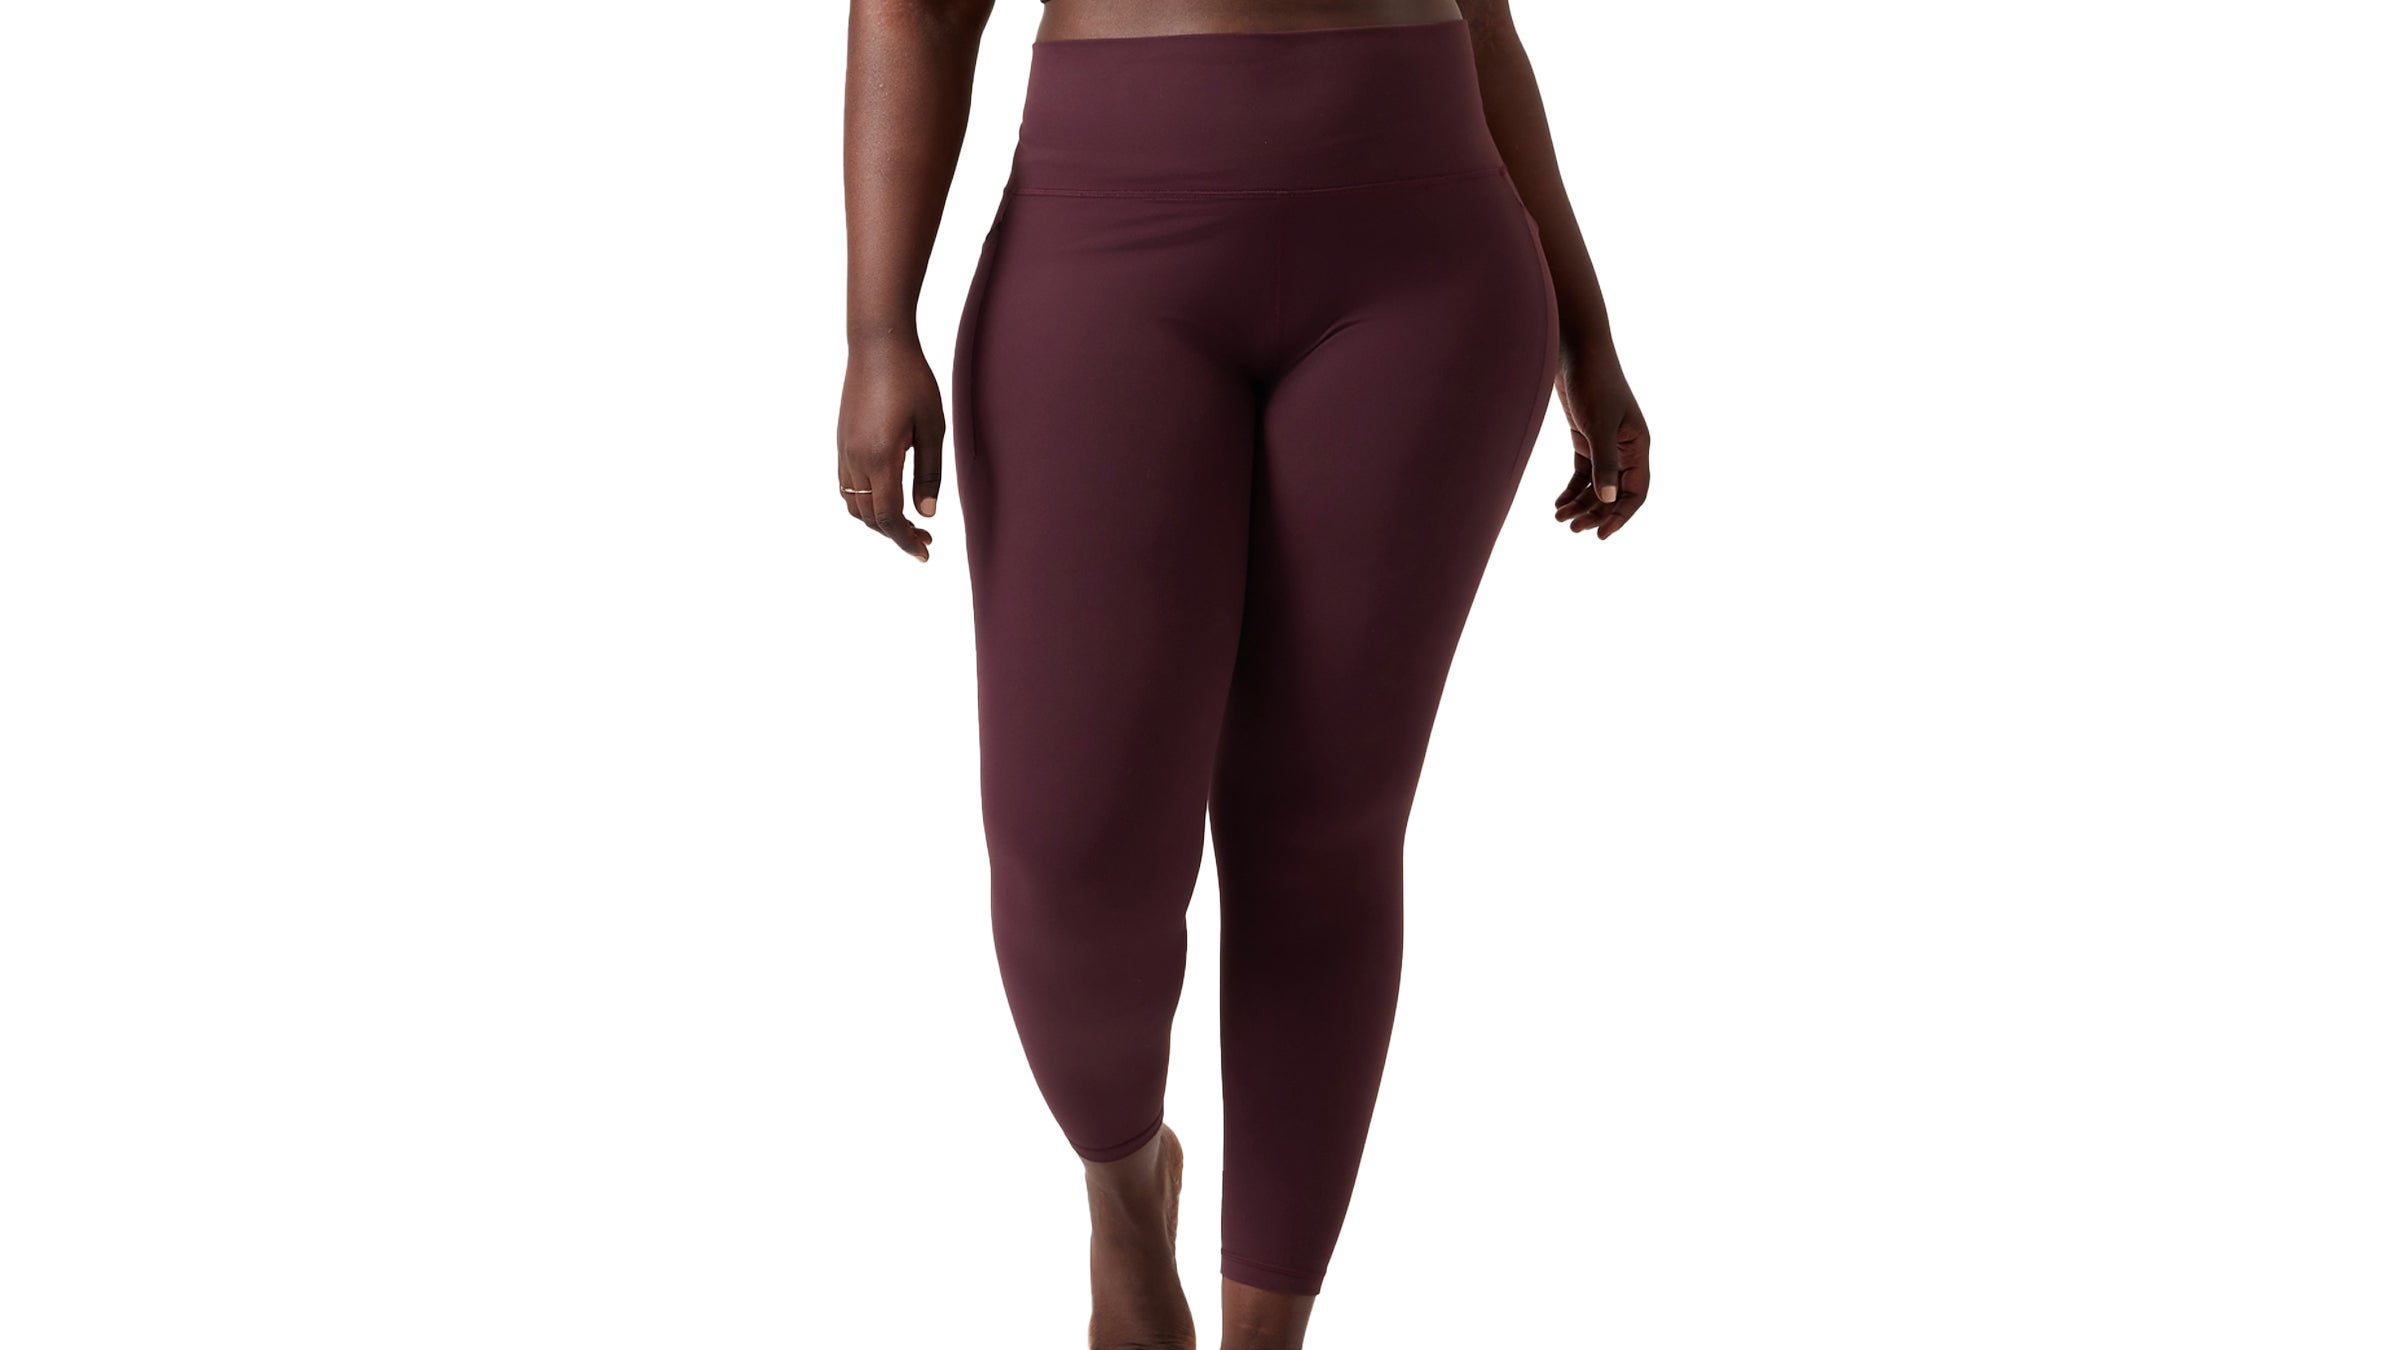 How to choose the best yoga pants: Benefits, risks, and more